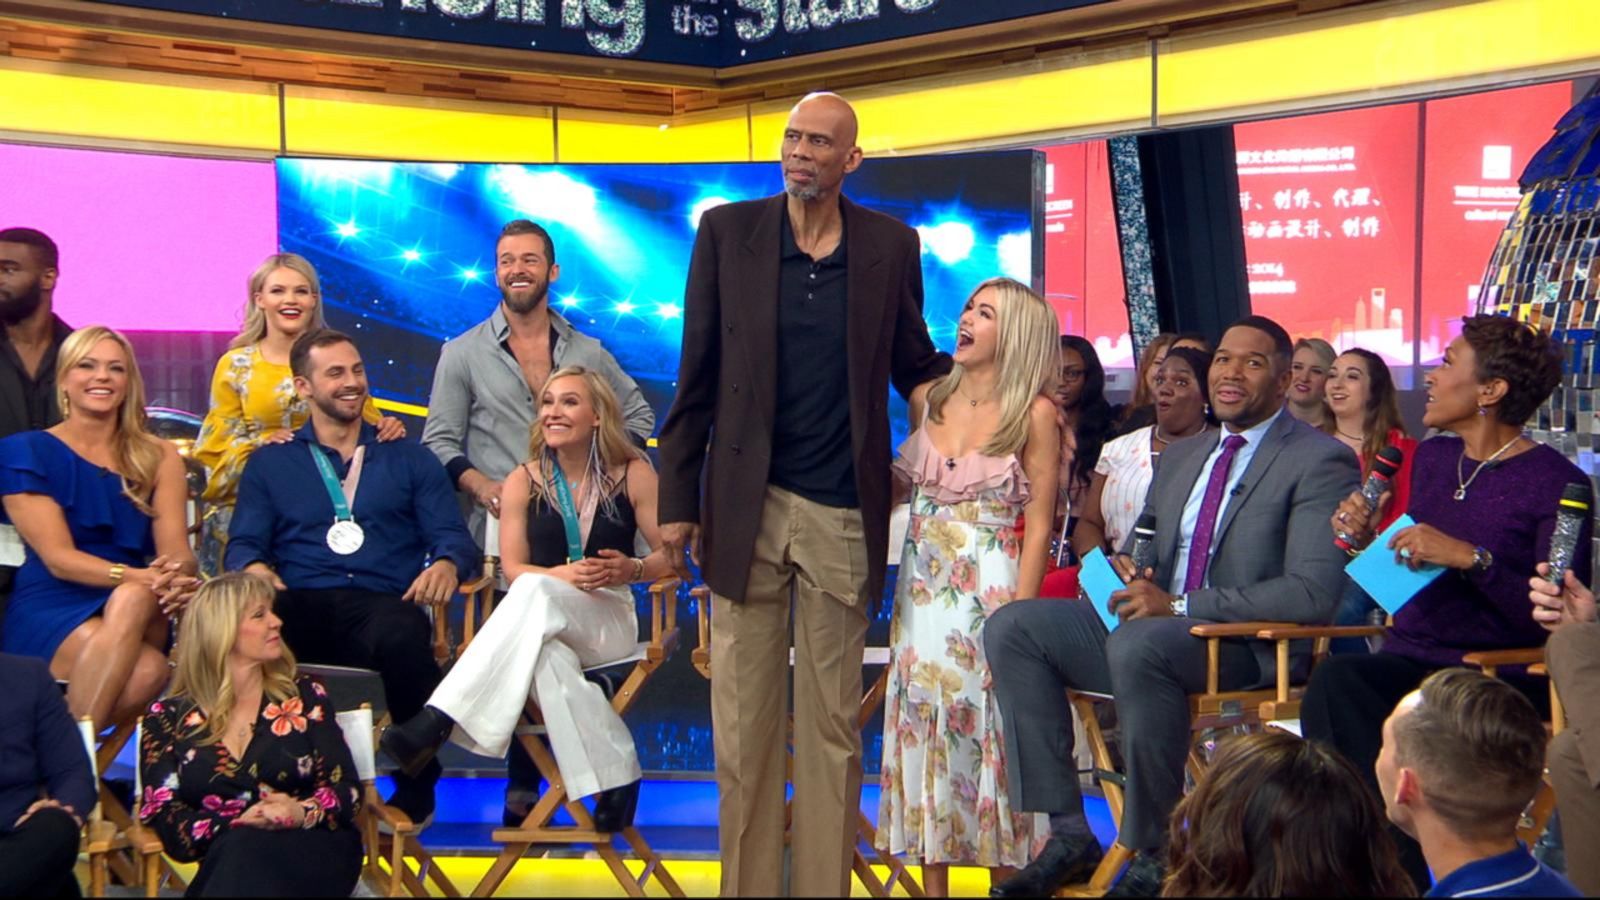 VIDEO: 'Dancing With the Stars' season 26 cast speaks out on 'GMA'